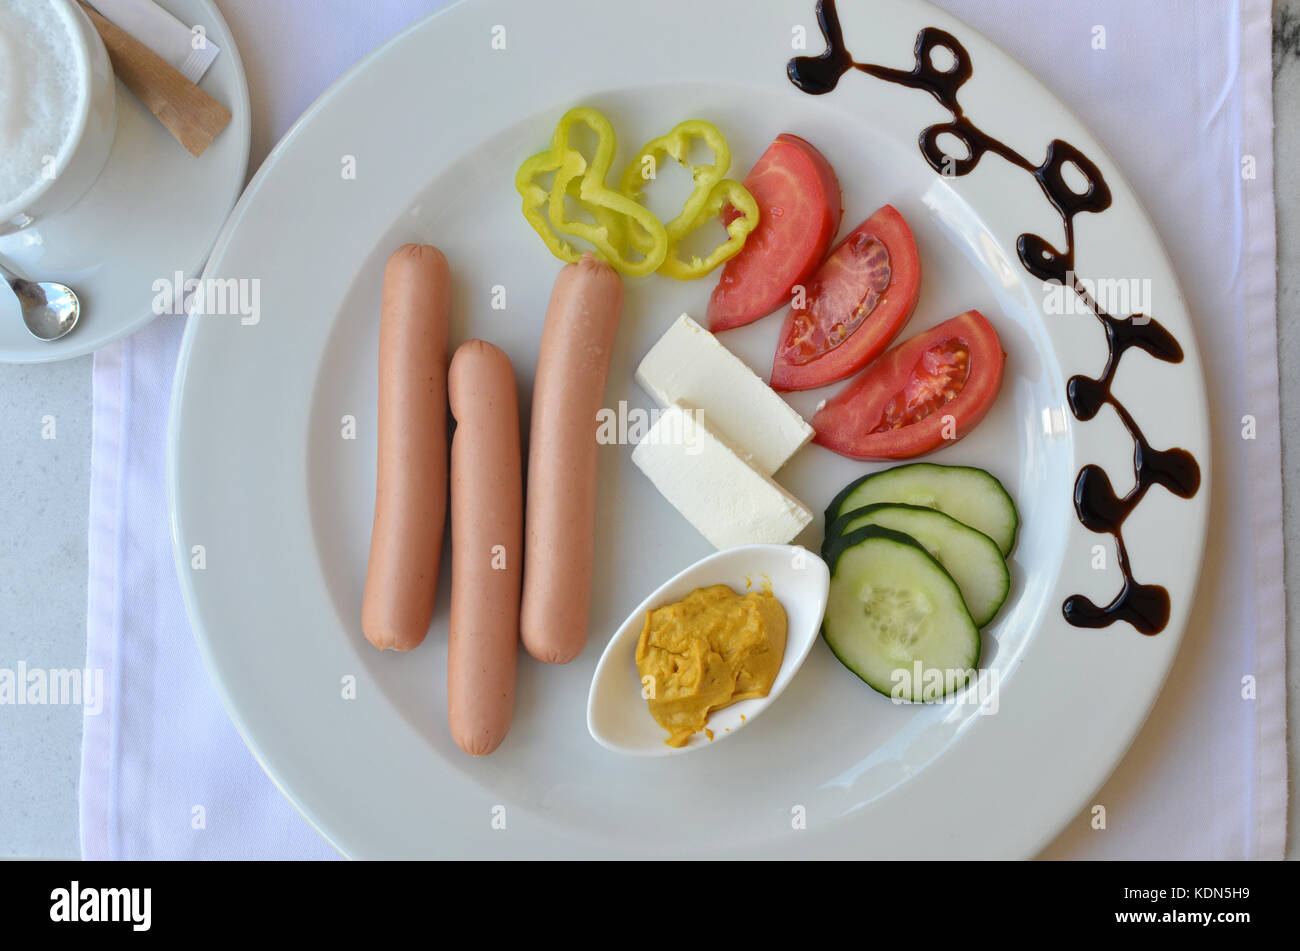 Plate with served breakfast - hot dogs and fresh vegetables Stock Photo